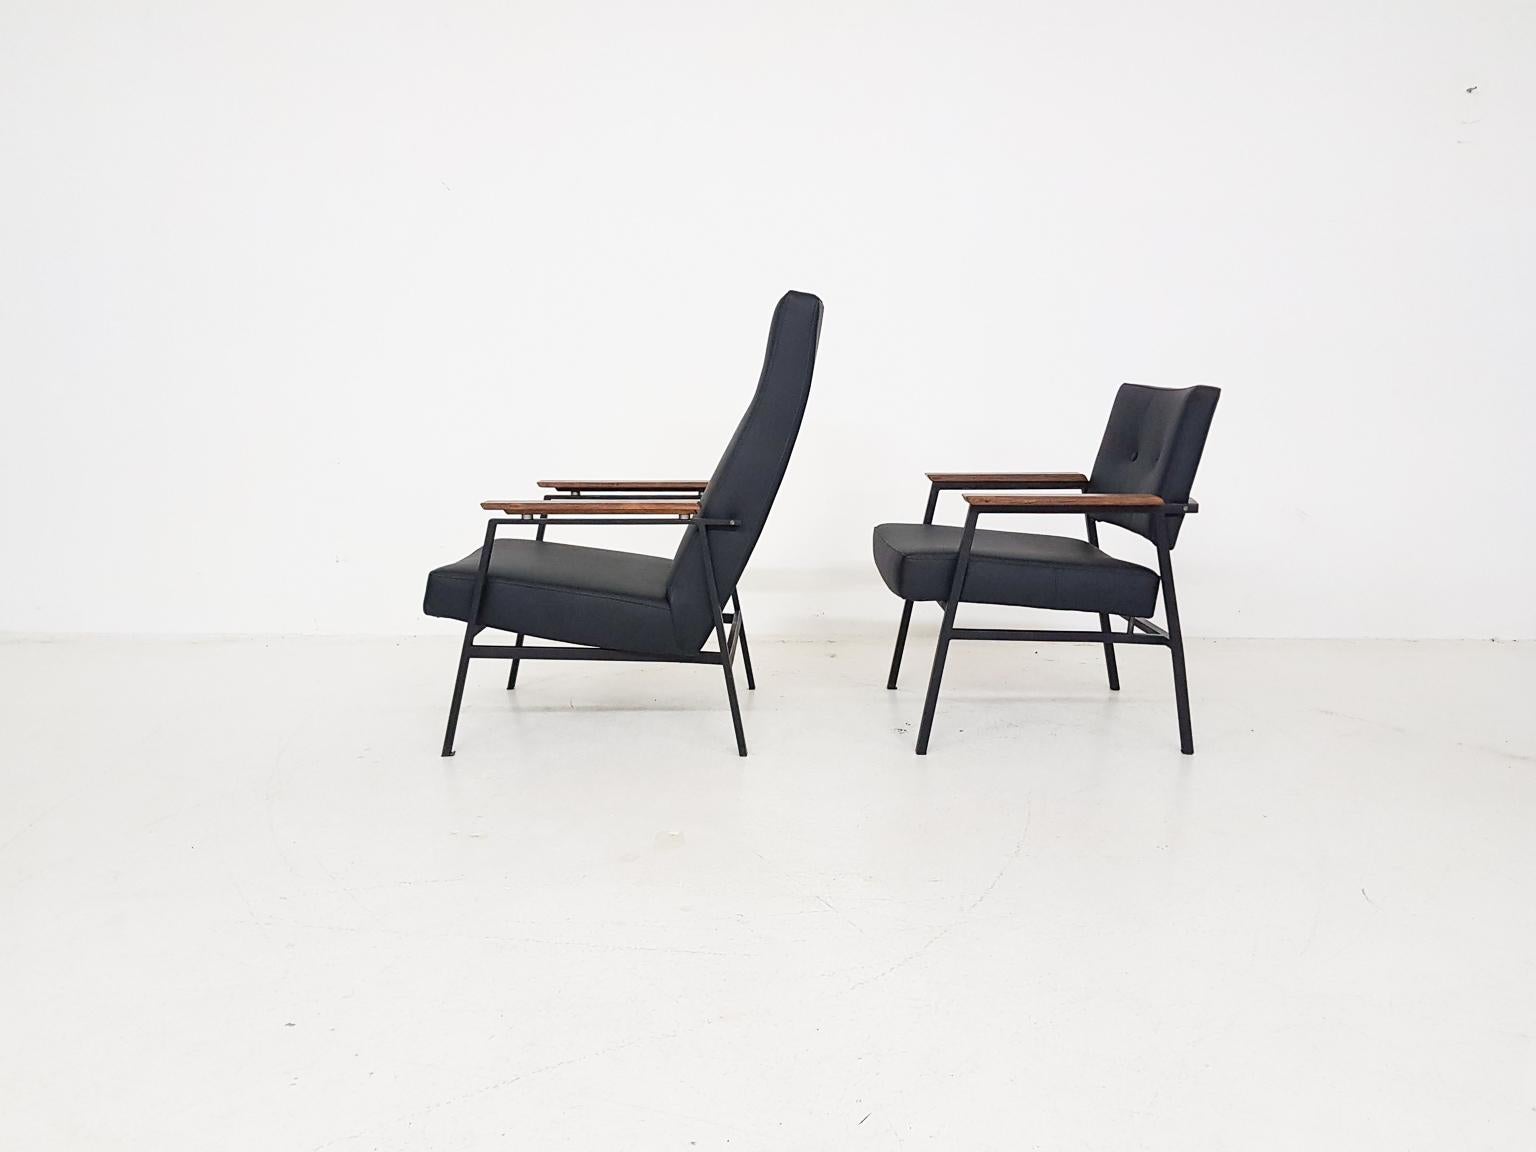 Pair of lounge chairs made of steel and black leatherette, designed by Avanti the Netherlands in the 1960s.

The pair features two different versions often called 